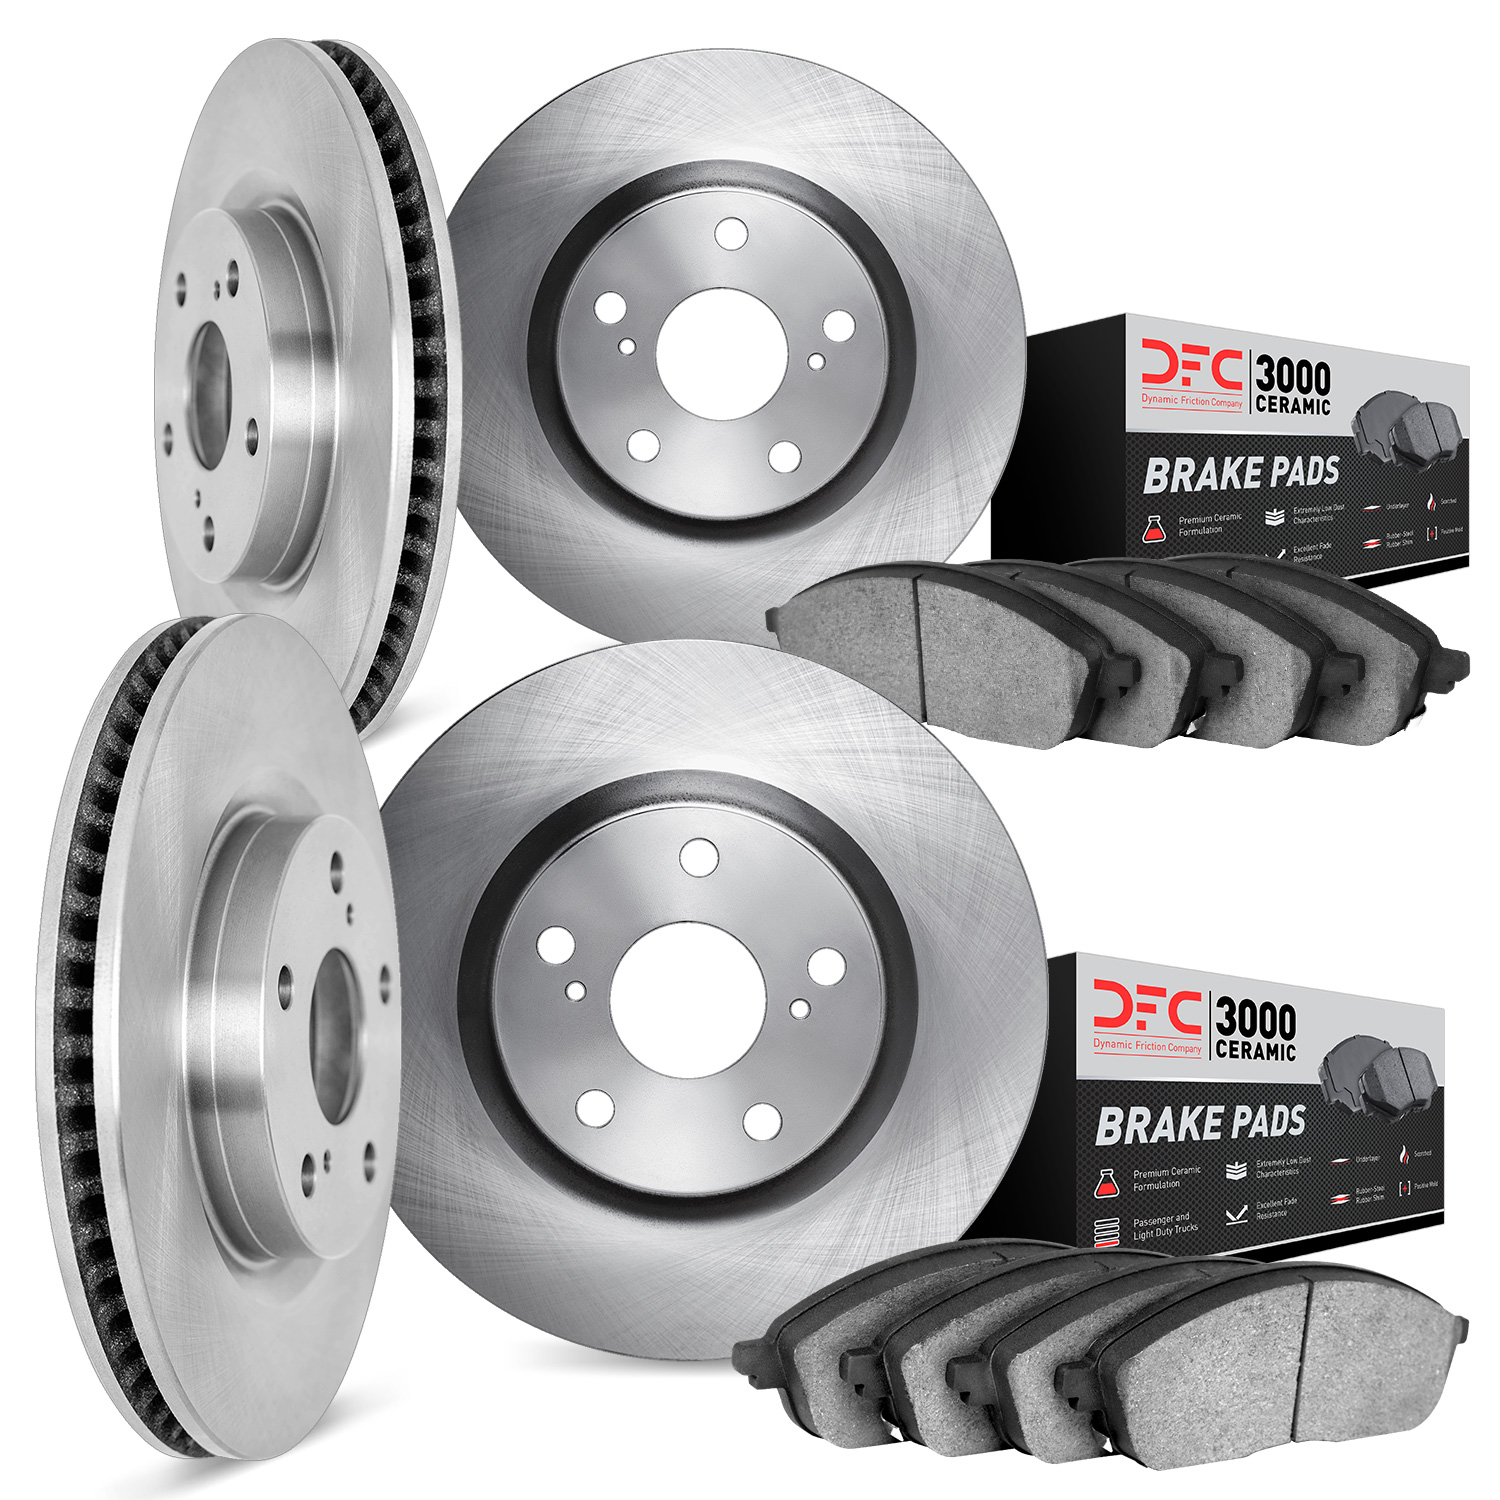 6304-75008 Brake Rotors with 3000-Series Ceramic Brake Pads Kit, 1995-2000 Lexus/Toyota/Scion, Position: Front and Rear